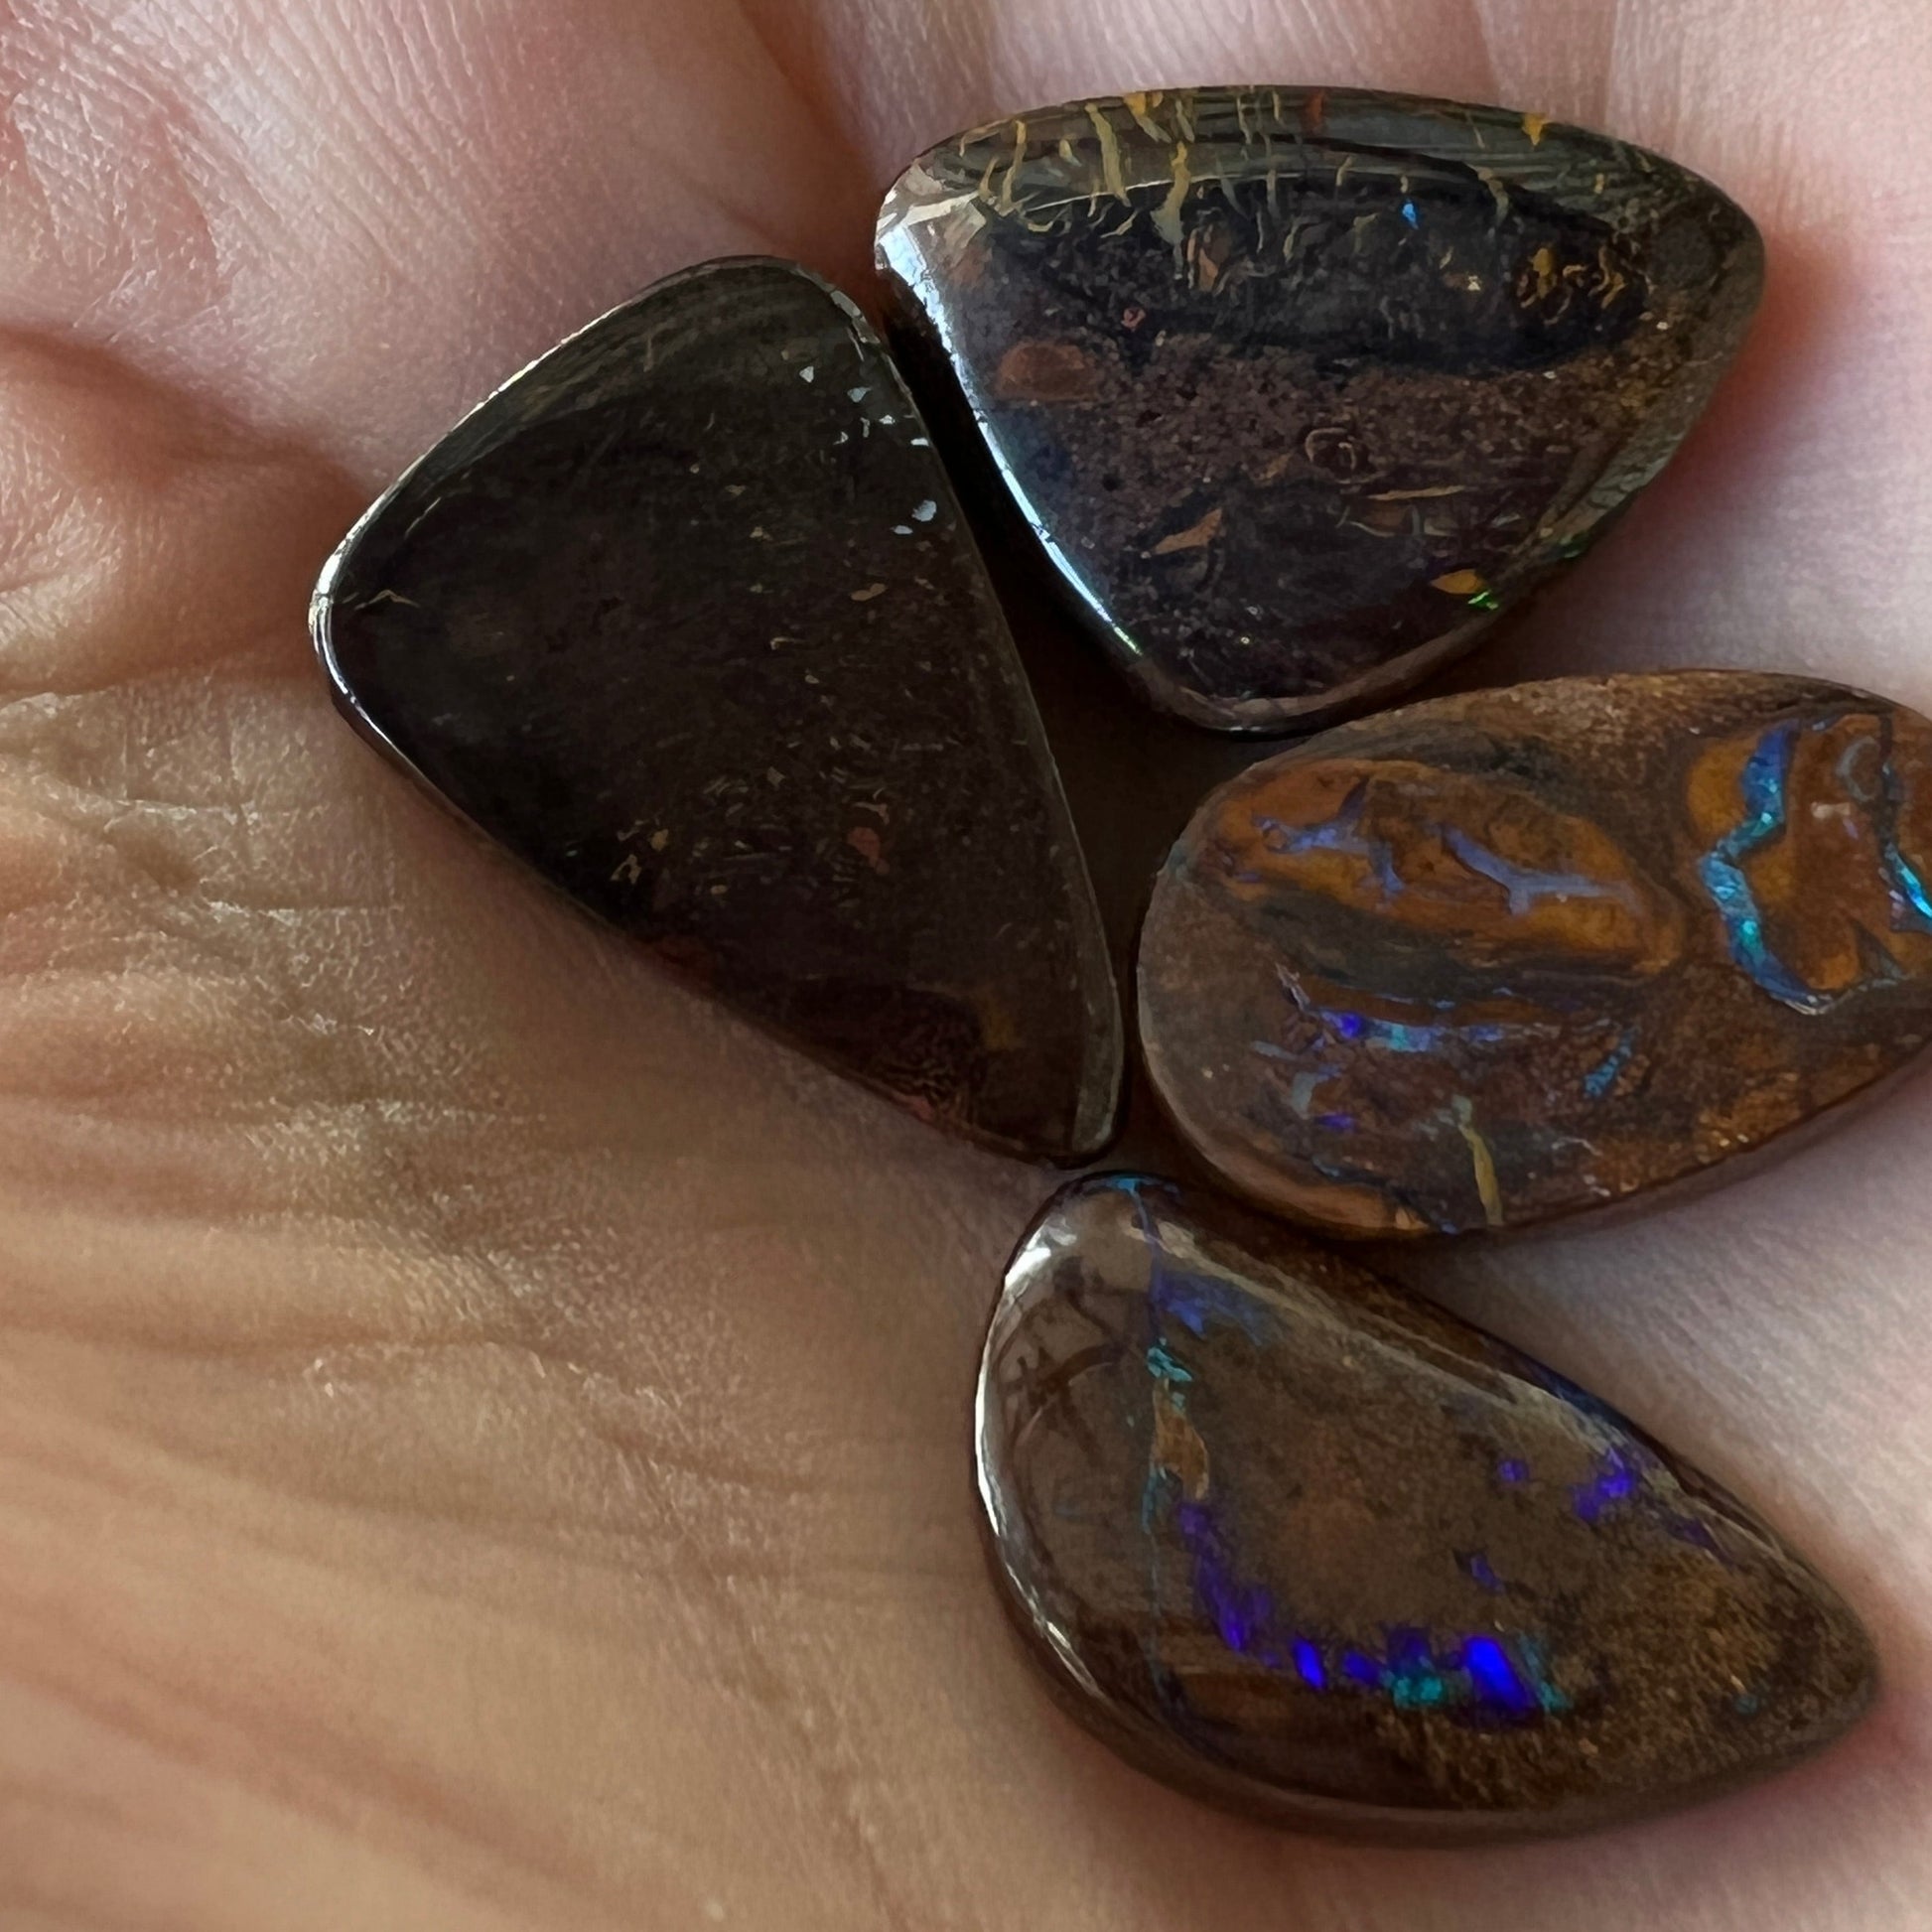 Four delightful pieces of boulder opal from Winton. Nice sparkles and polish.